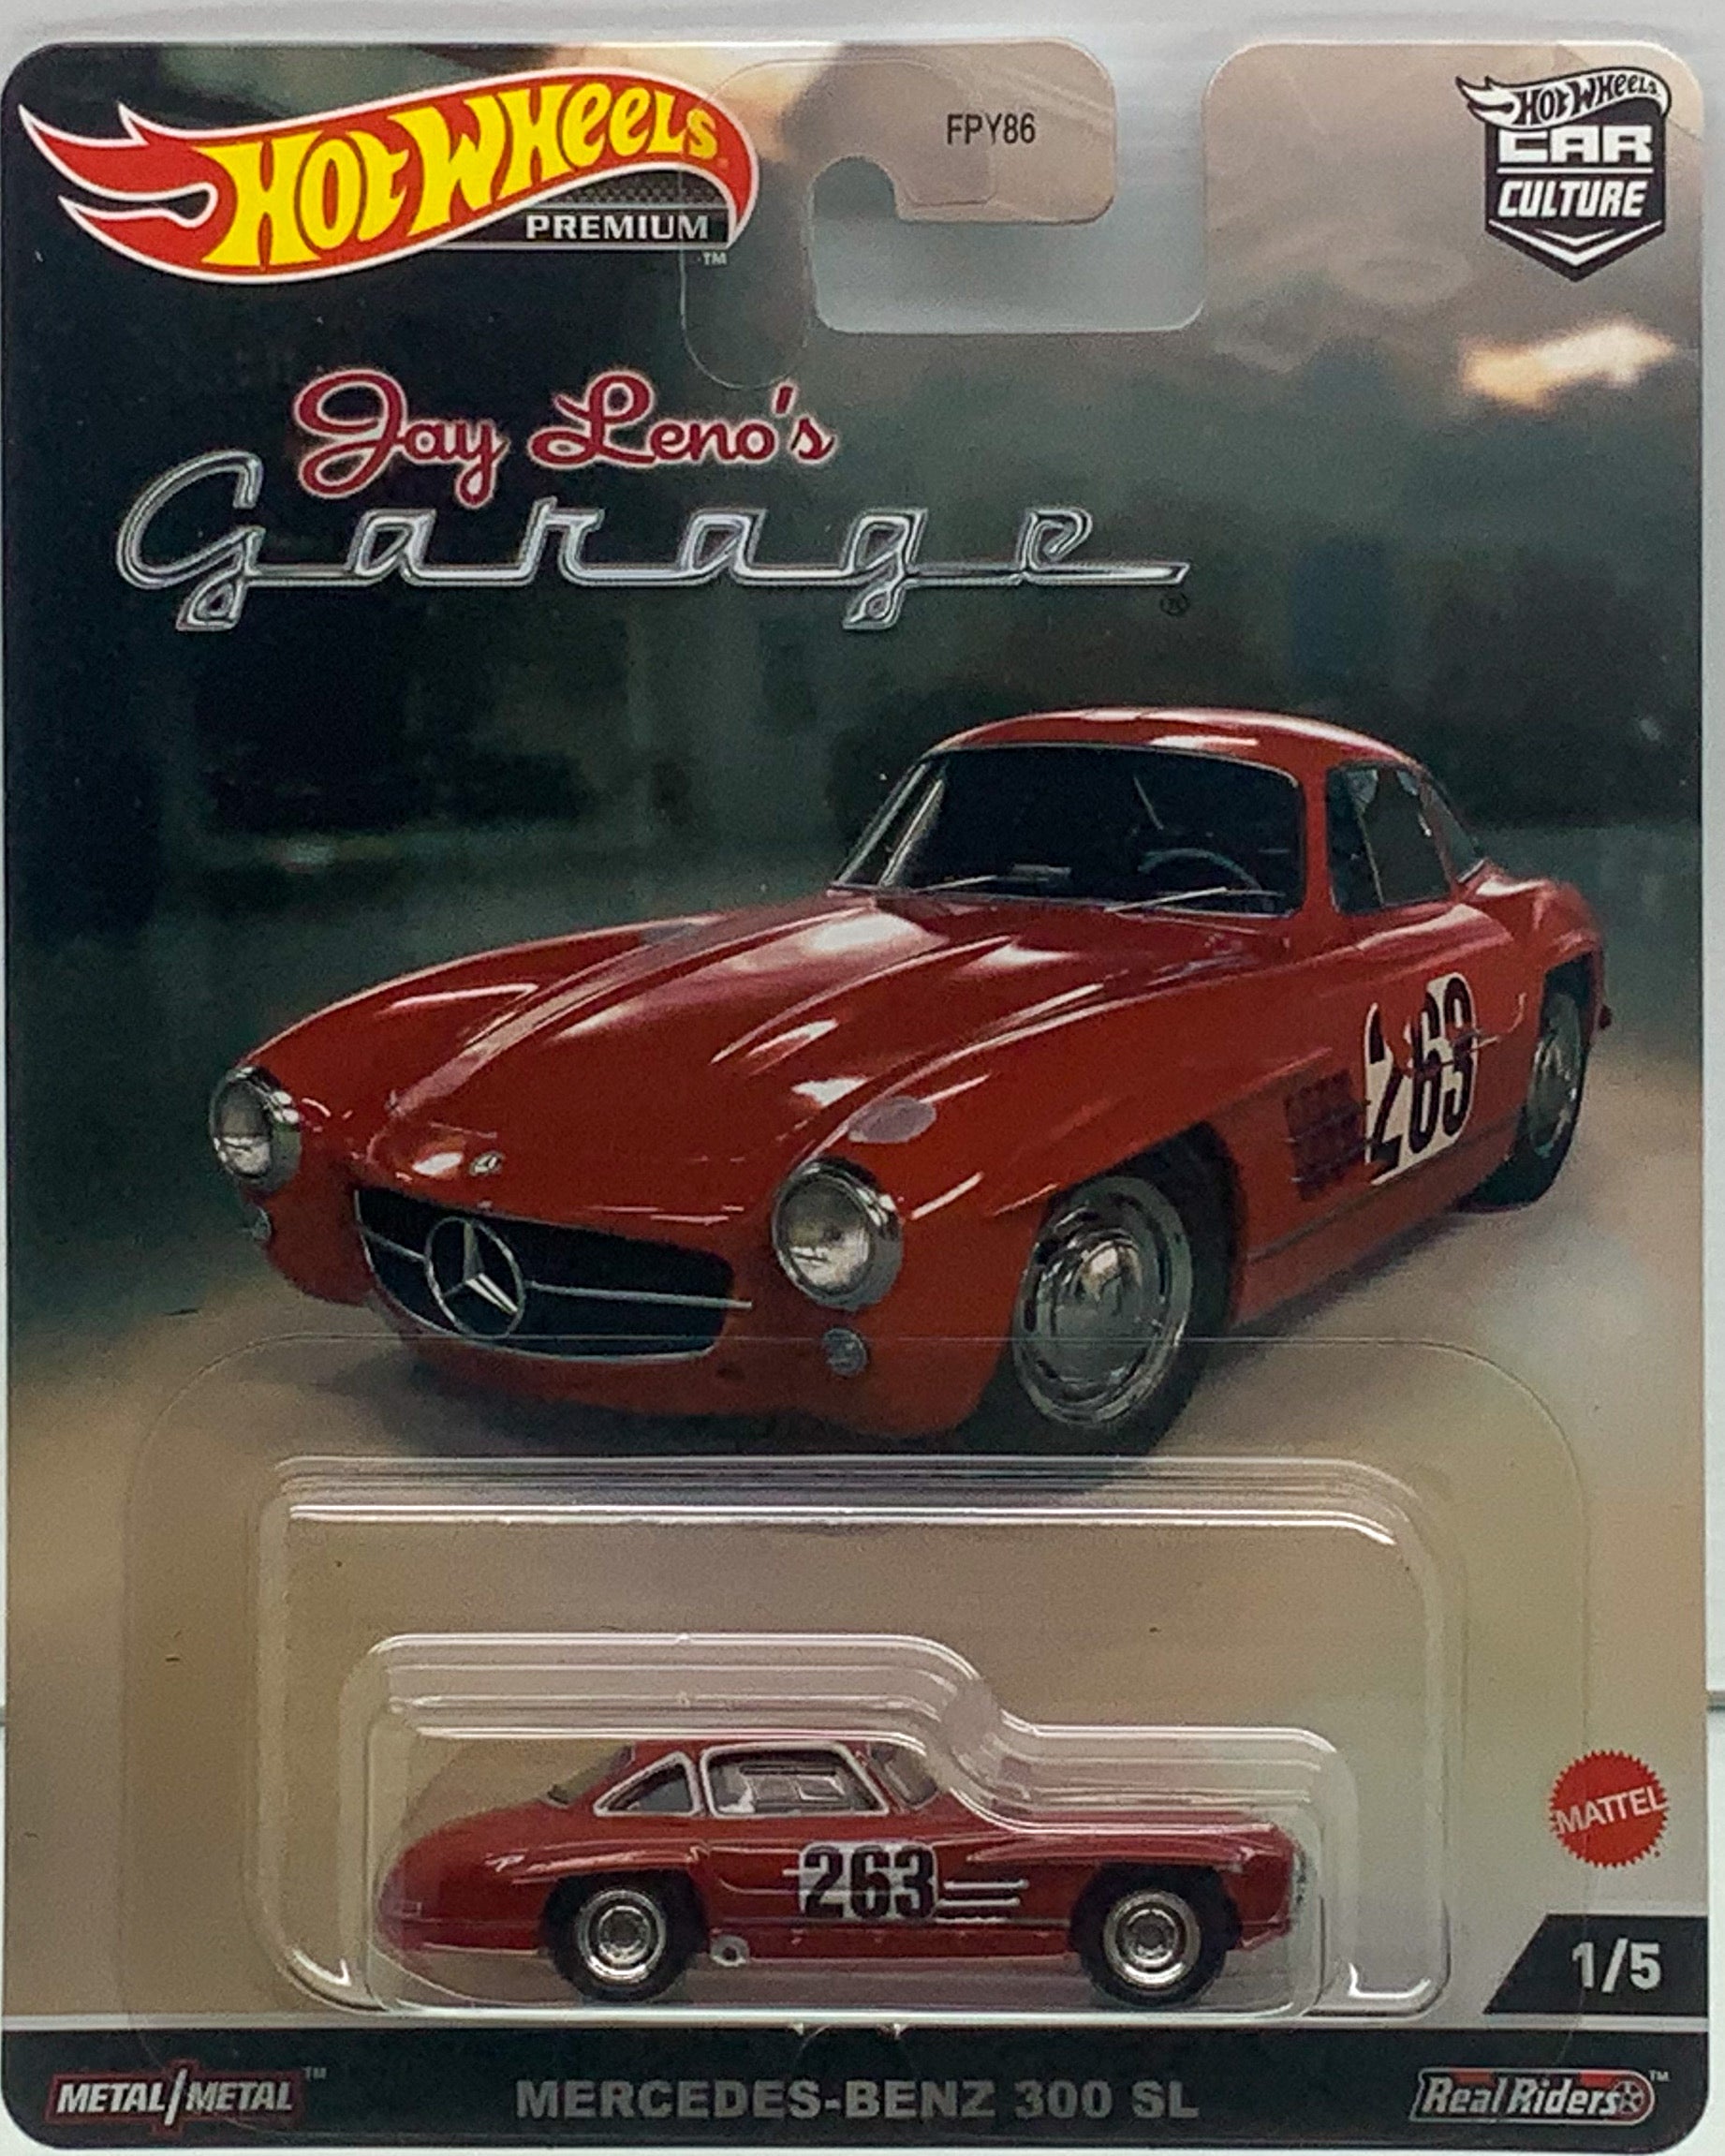 Buy at Tatoyshop.com Hot Wheels Car Culture  Mercedes-Benz 300 SL 1/5   Number 1 from the set of 5 Jay Leno’s Garage Series Premium Real Riders Metal Mattel FPY86 Shop Now   Mr Toys Kmart Target Big W 